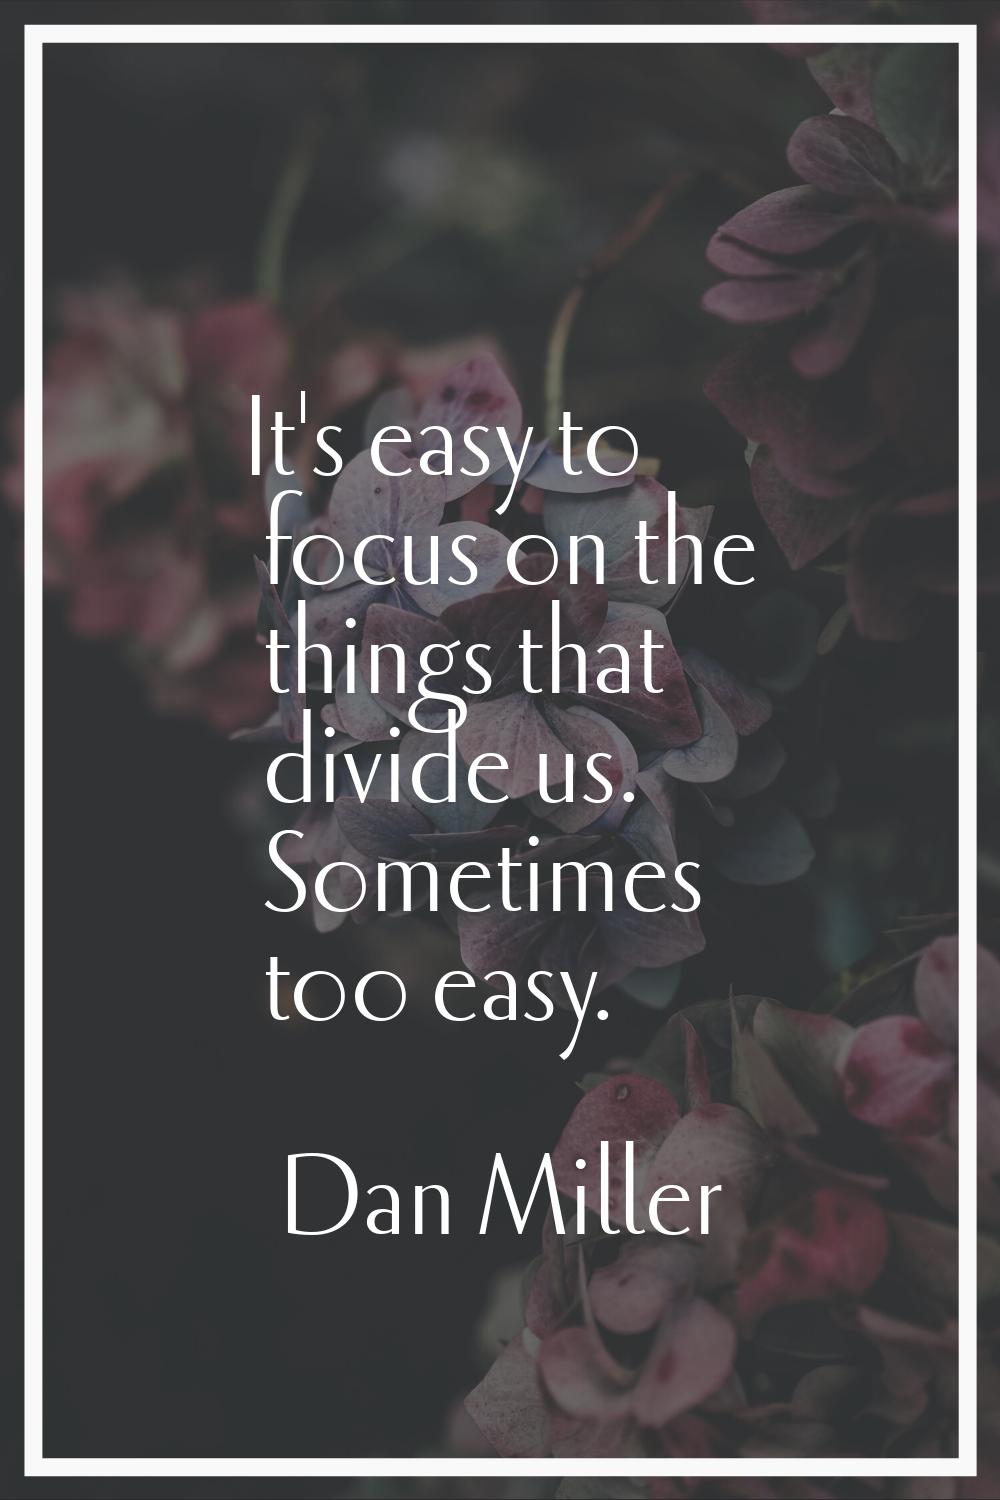 It's easy to focus on the things that divide us. Sometimes too easy.